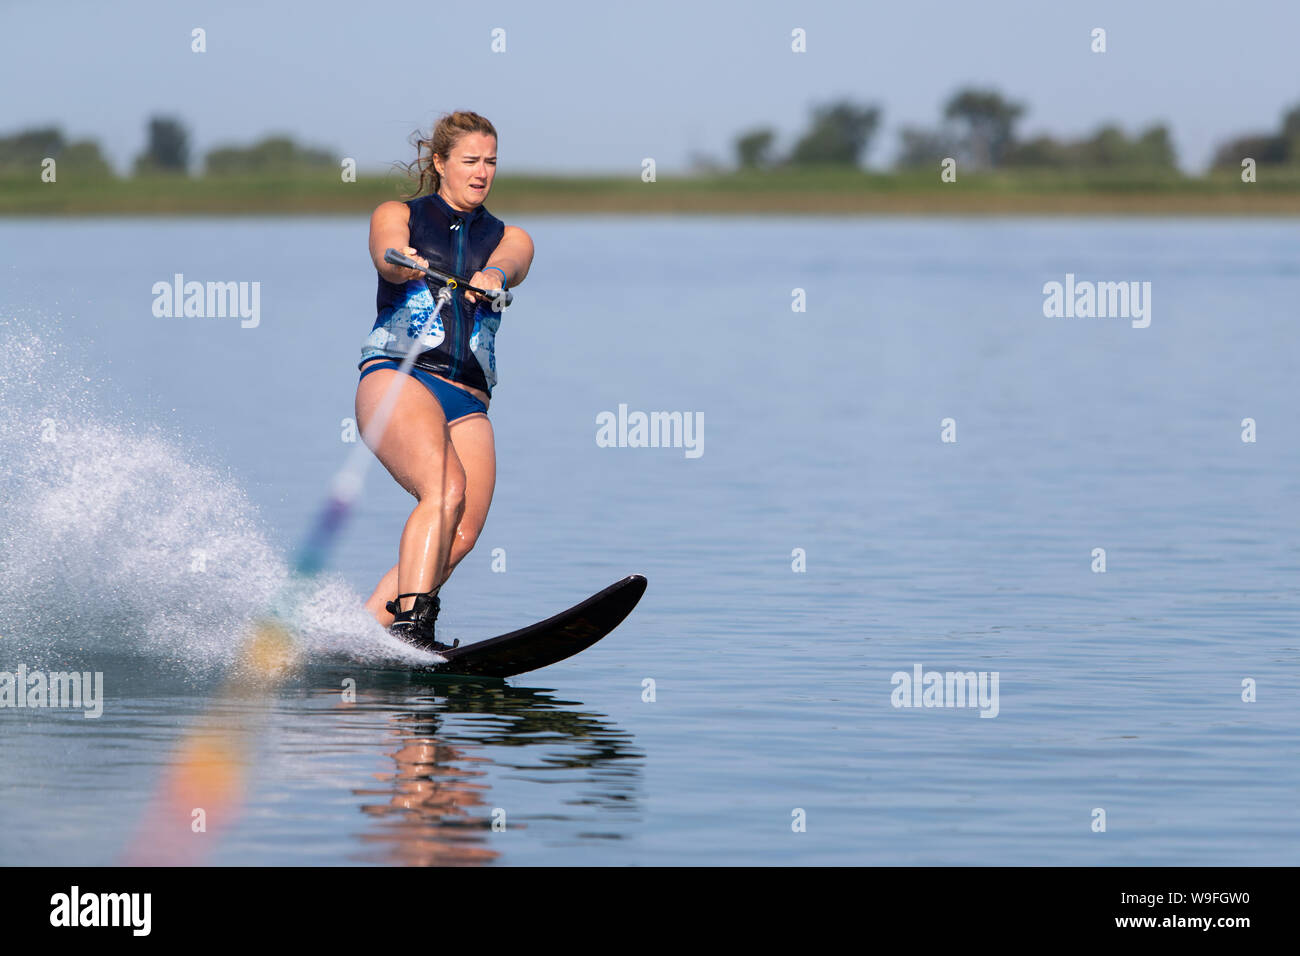 A woman waterskiing on a calm lake. Stock Photo